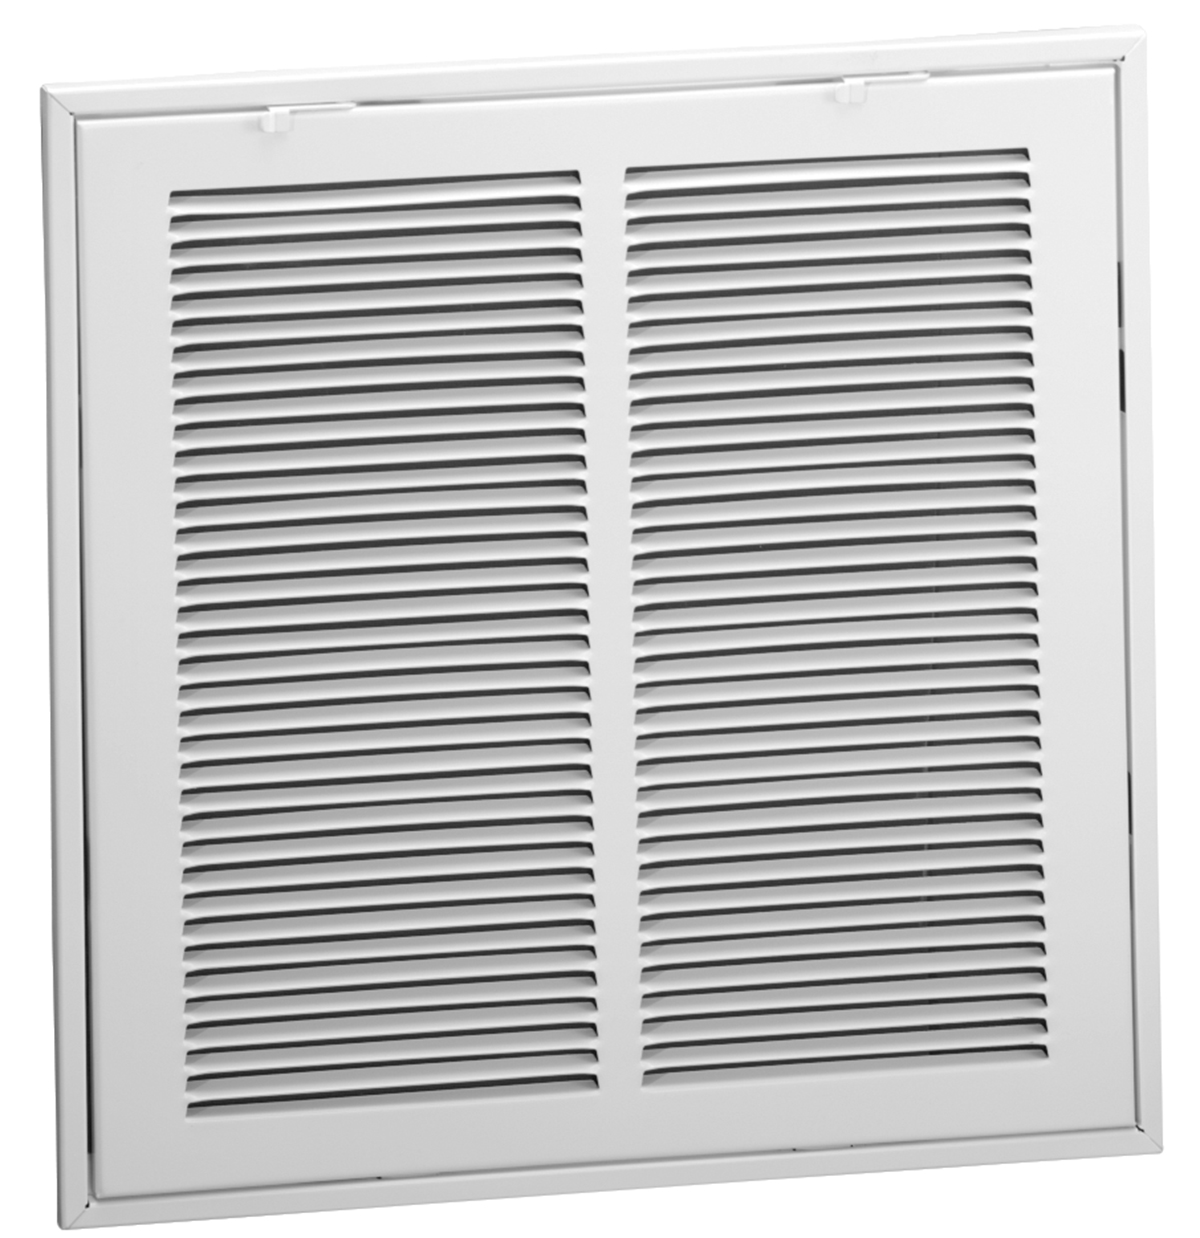 Filter Grill Sizing Chart